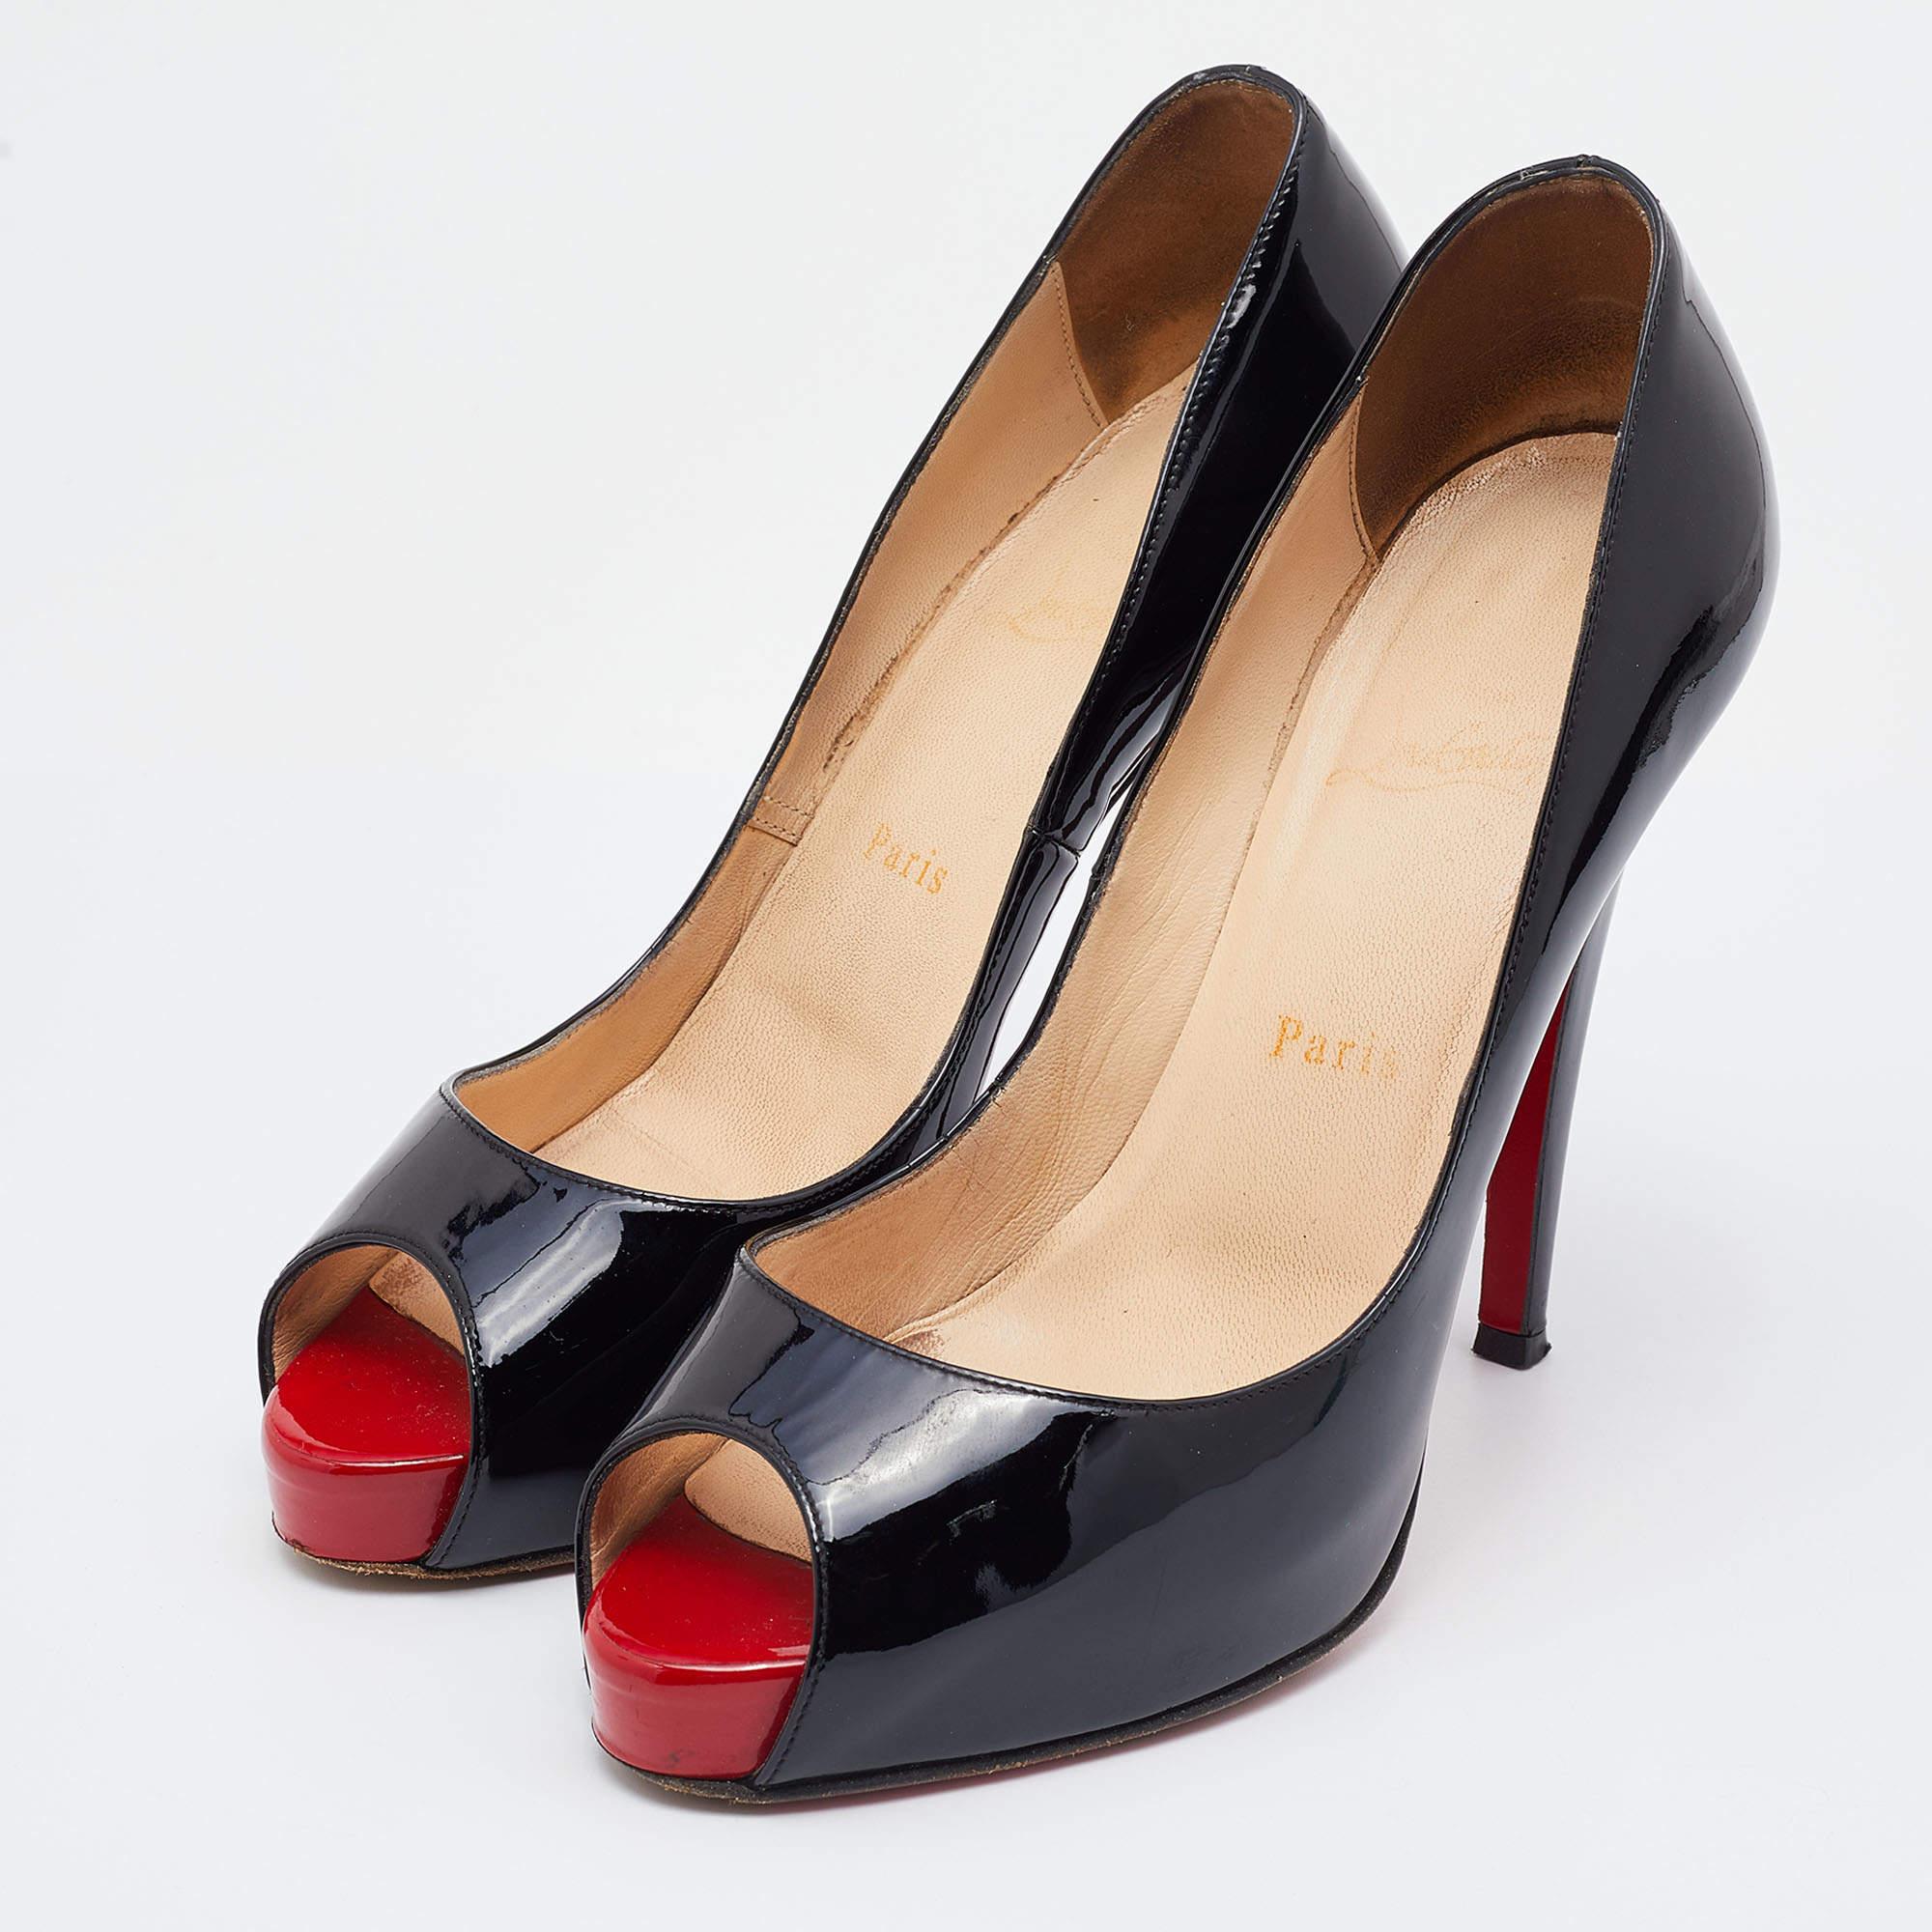 Women's Christian Louboutin Black Patent Leather New Very Prive Pumps Size 39 For Sale